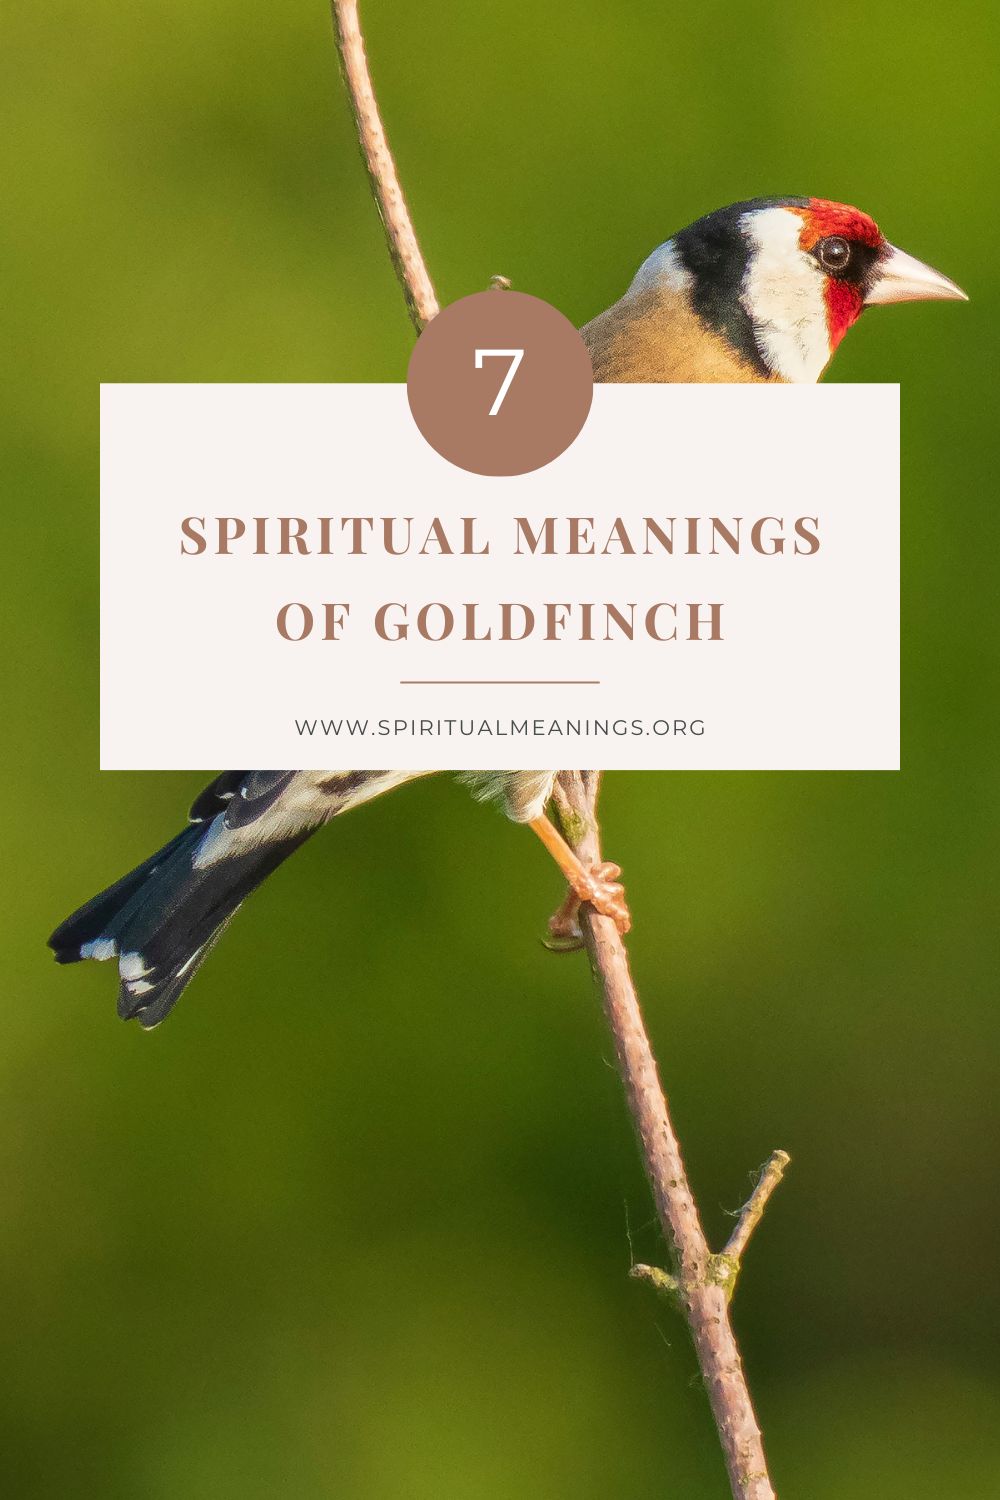 Spiritual Meanings of Goldfinch